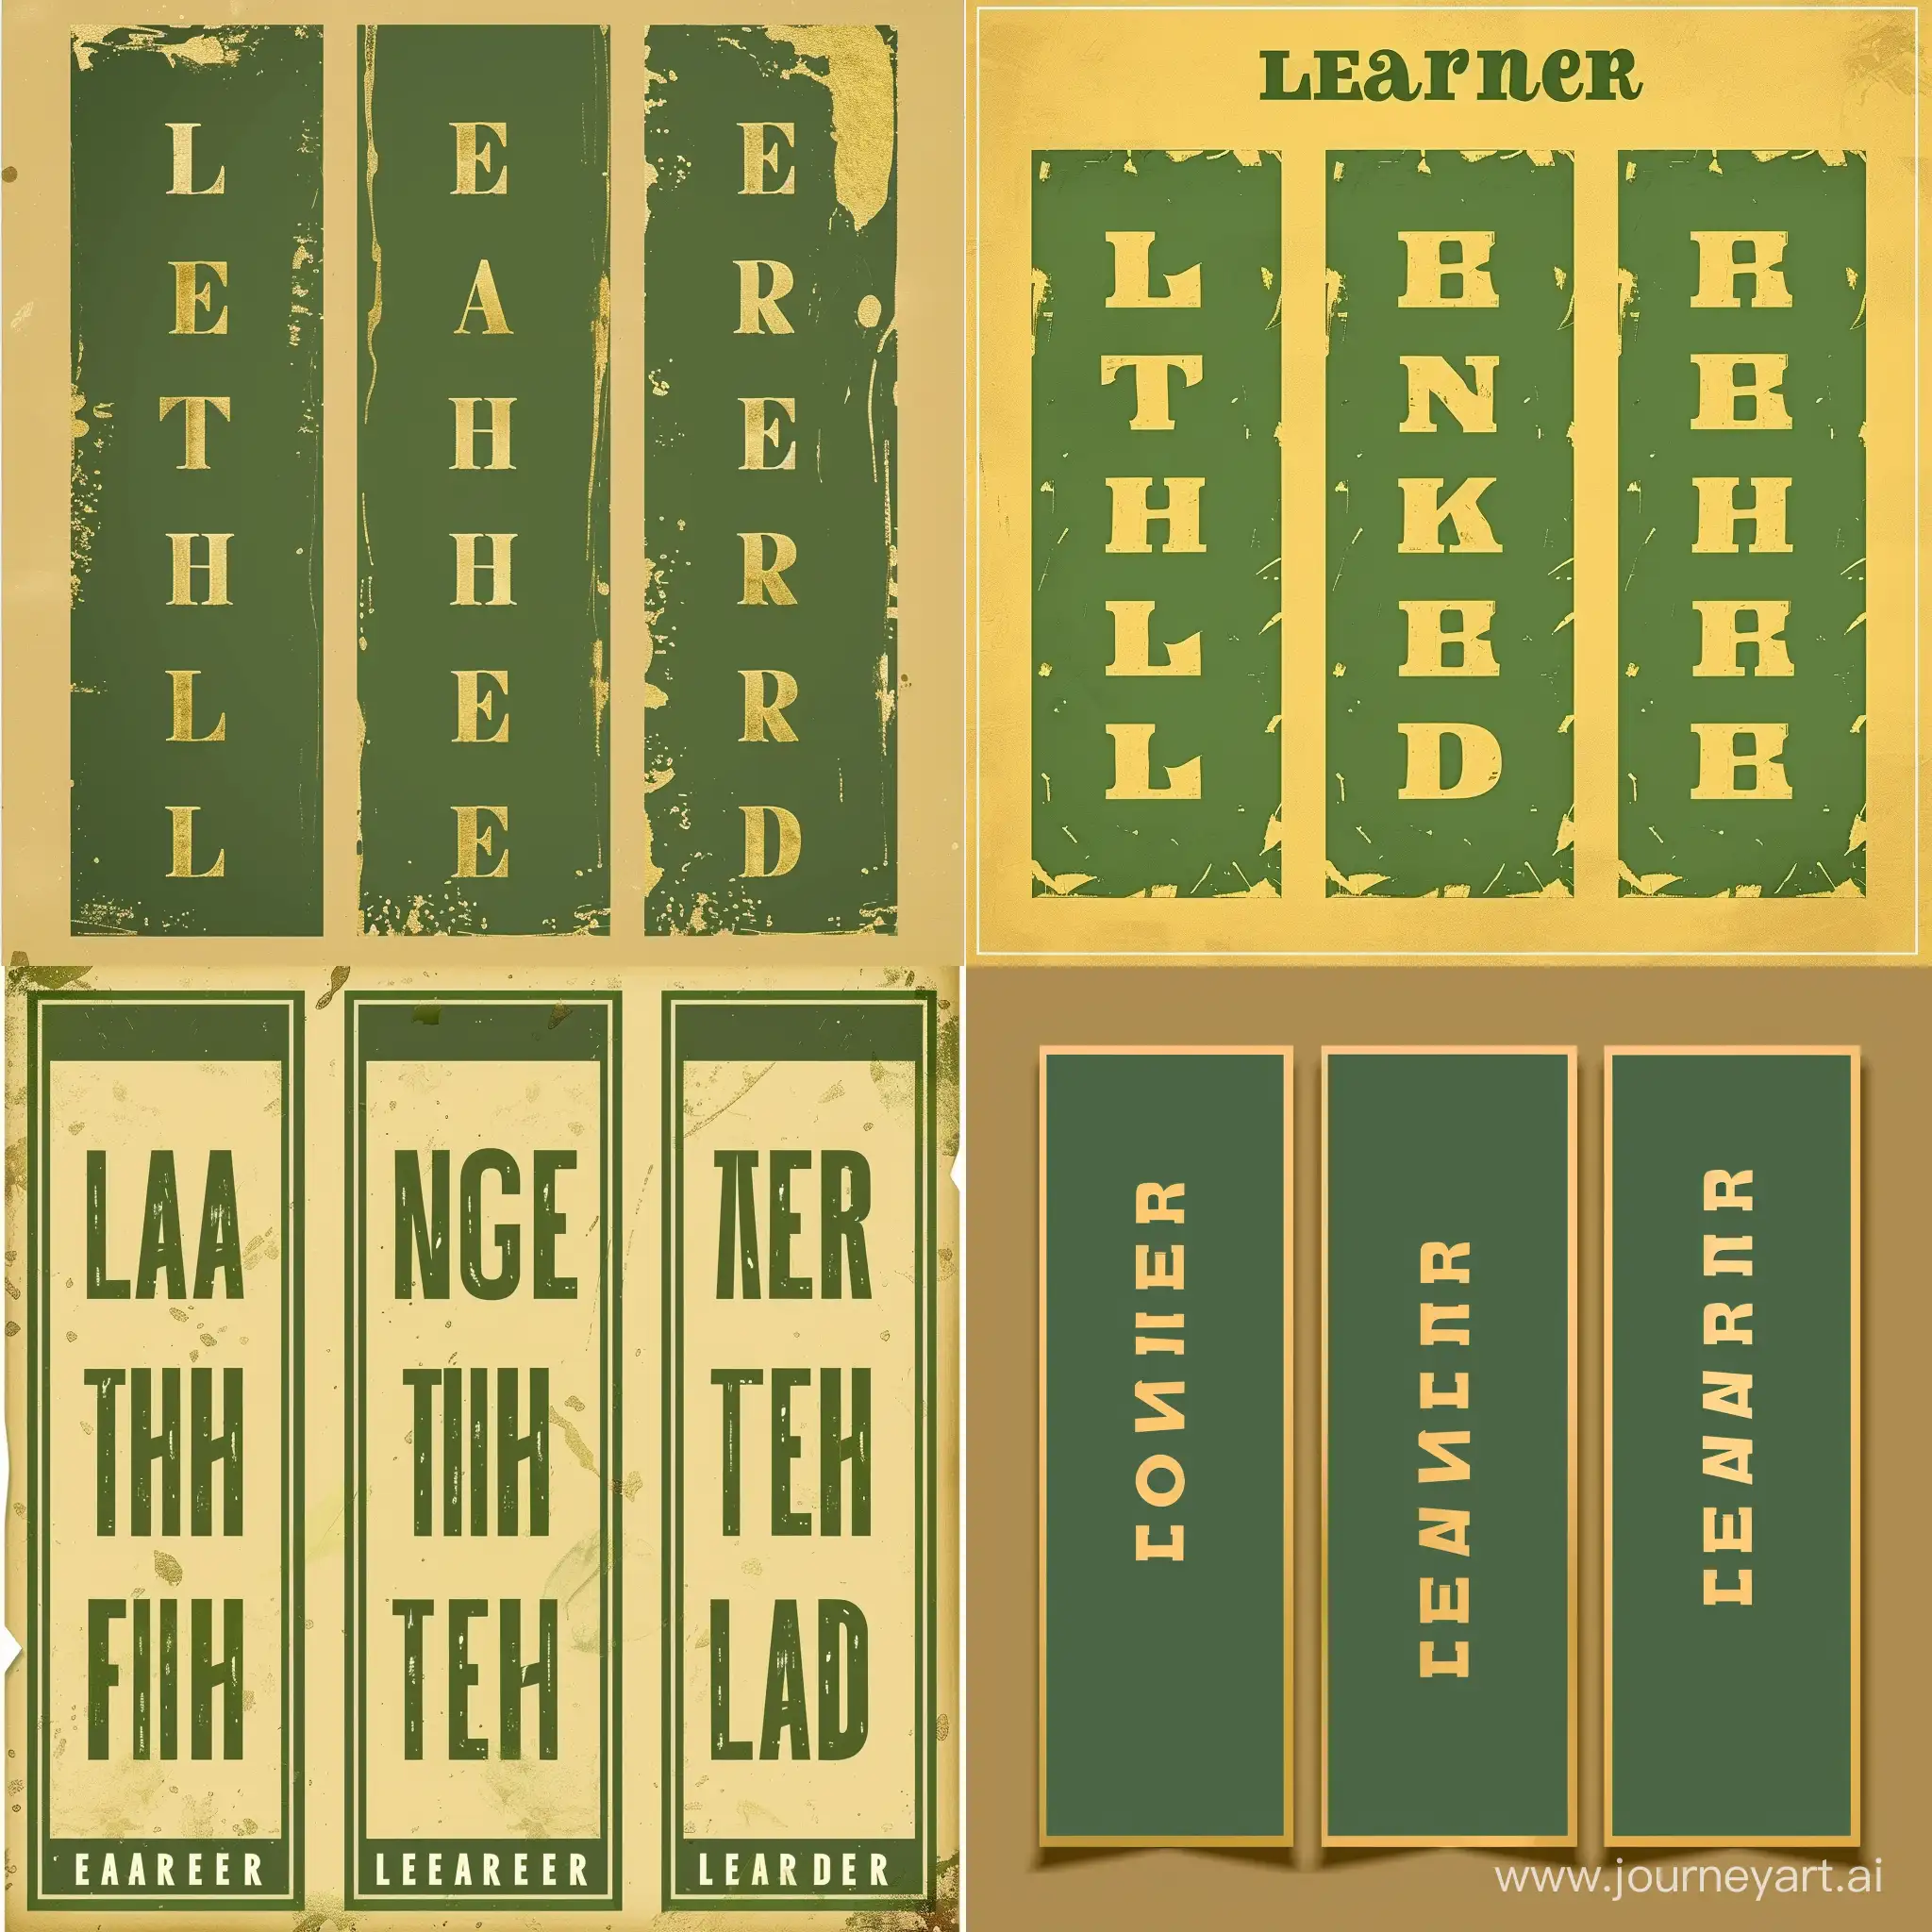 design a series of 3 vertical banners with  the words "learner" "thinker" "leader". the background should be a light gold colour. The words, written from top down, should take up most of the banner, and be most prominent. It will be hung at a parade square ground of a singapore secondary school. The theme colour of the school is green and gold. The letters' font should be a more simplistic modern feel for easy reading.